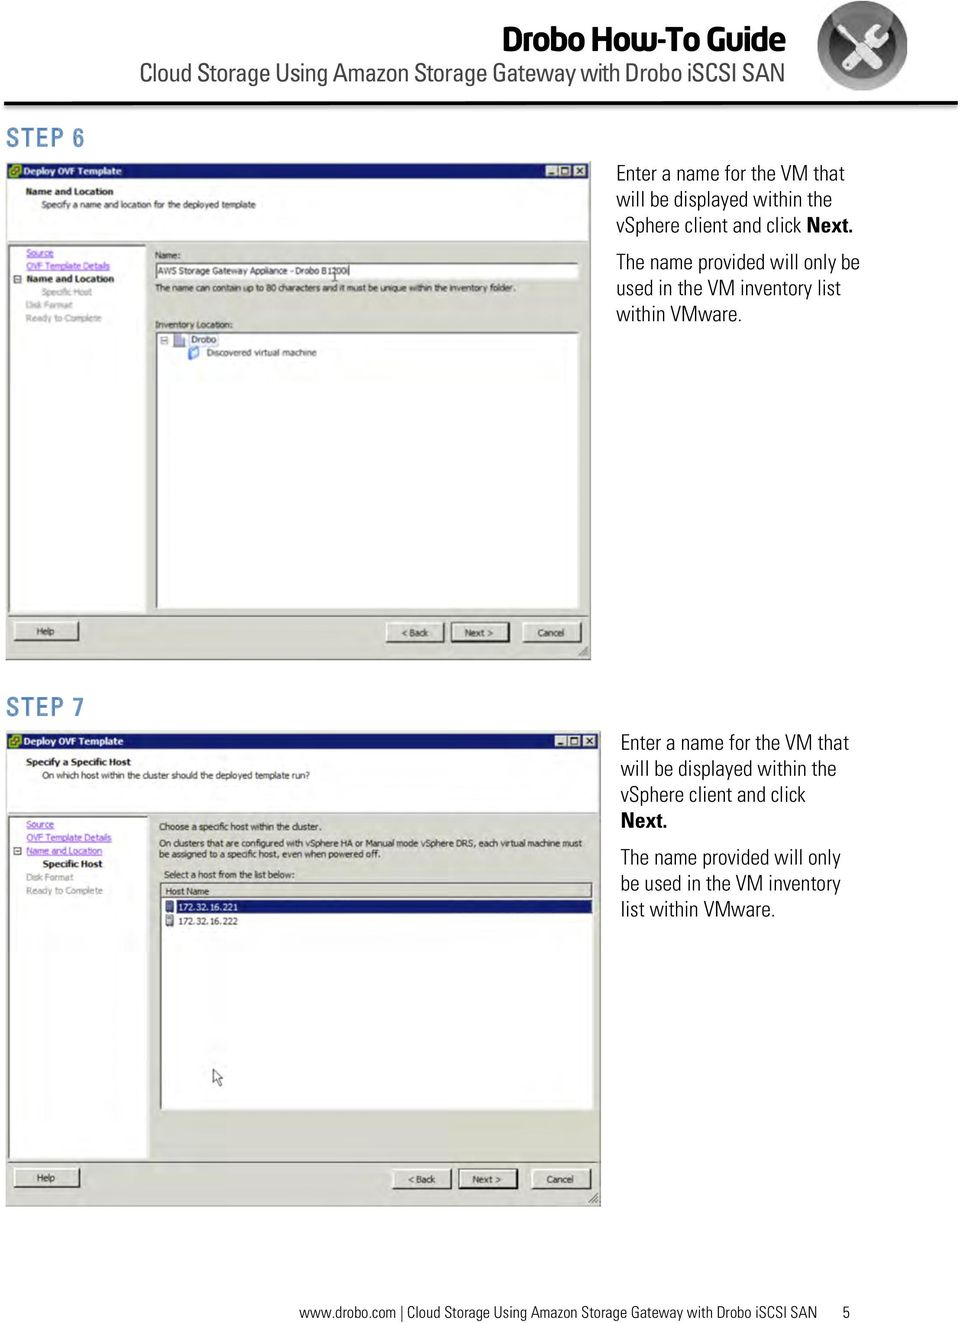 STEP 7 Enter a name for the VM that will be displayed within the vsphere client and click